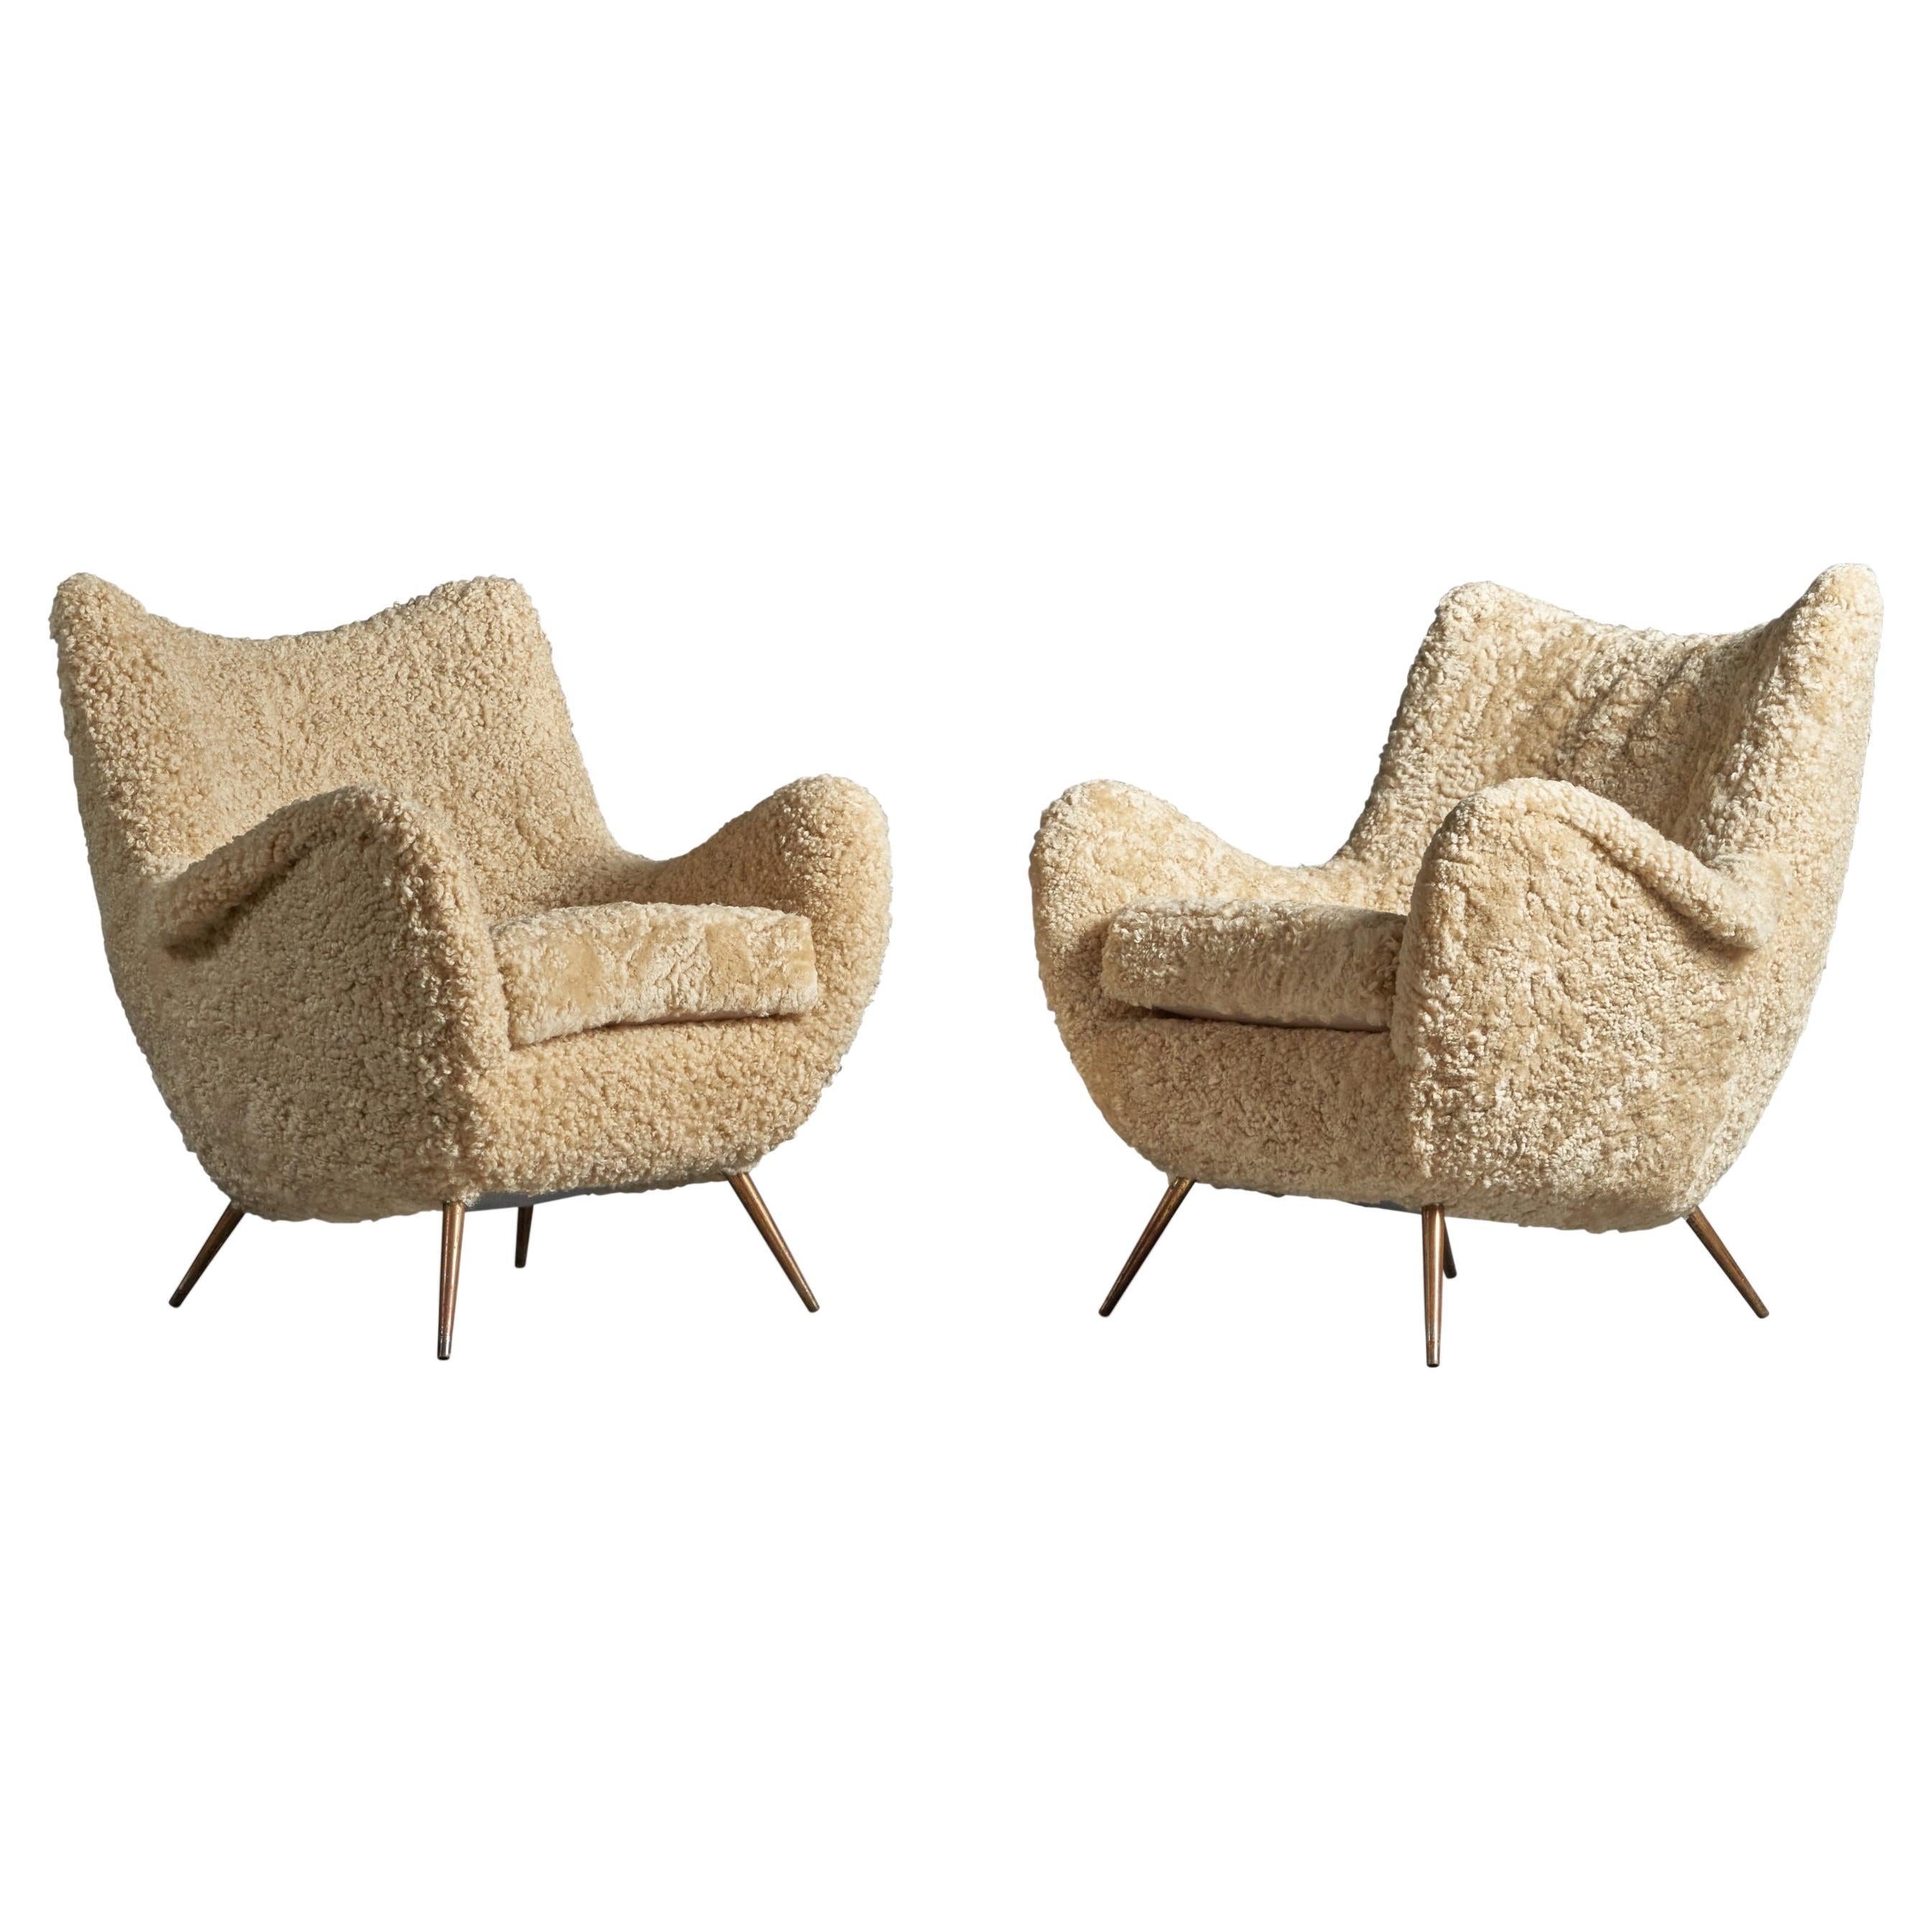 Italian Designer, Lounge Chairs, Shearling, Brass, Italy, 1950s For Sale